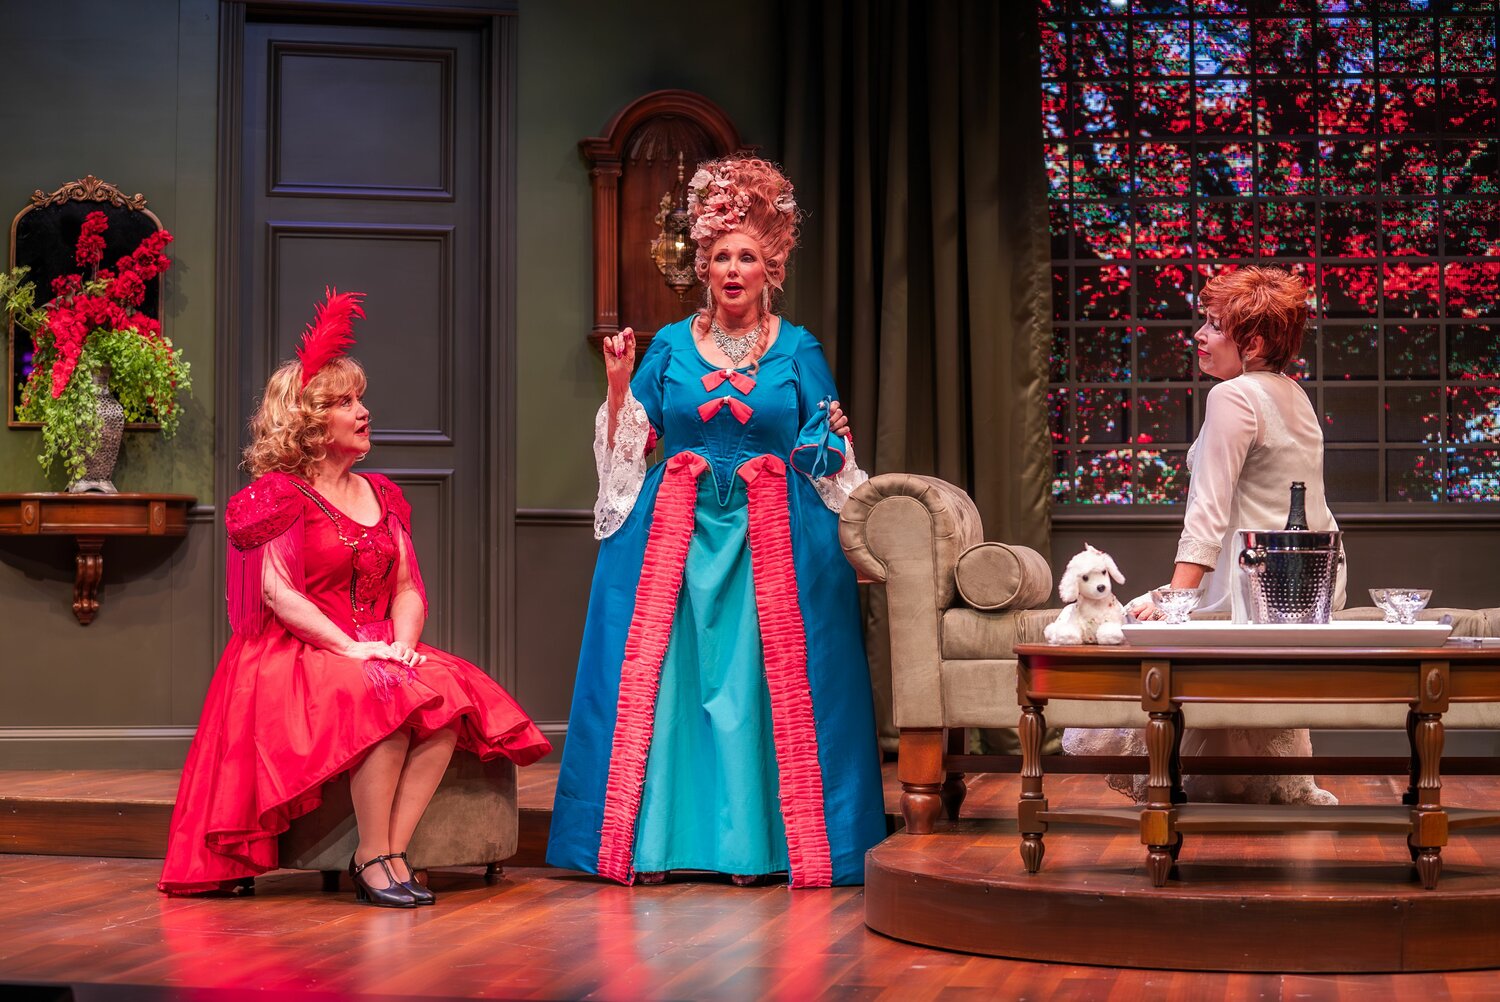 Morgan Fairchild (center) dons a wig and costume in the role of Monette Gentry alongside co-stars Lori Legacy (left) and Cathy Barnett (right) during the dress rehearsal for “Always a Bridesmaid,” a comedy produced last November at the New Theatre and Restaurant in Overland Park, Kansas.